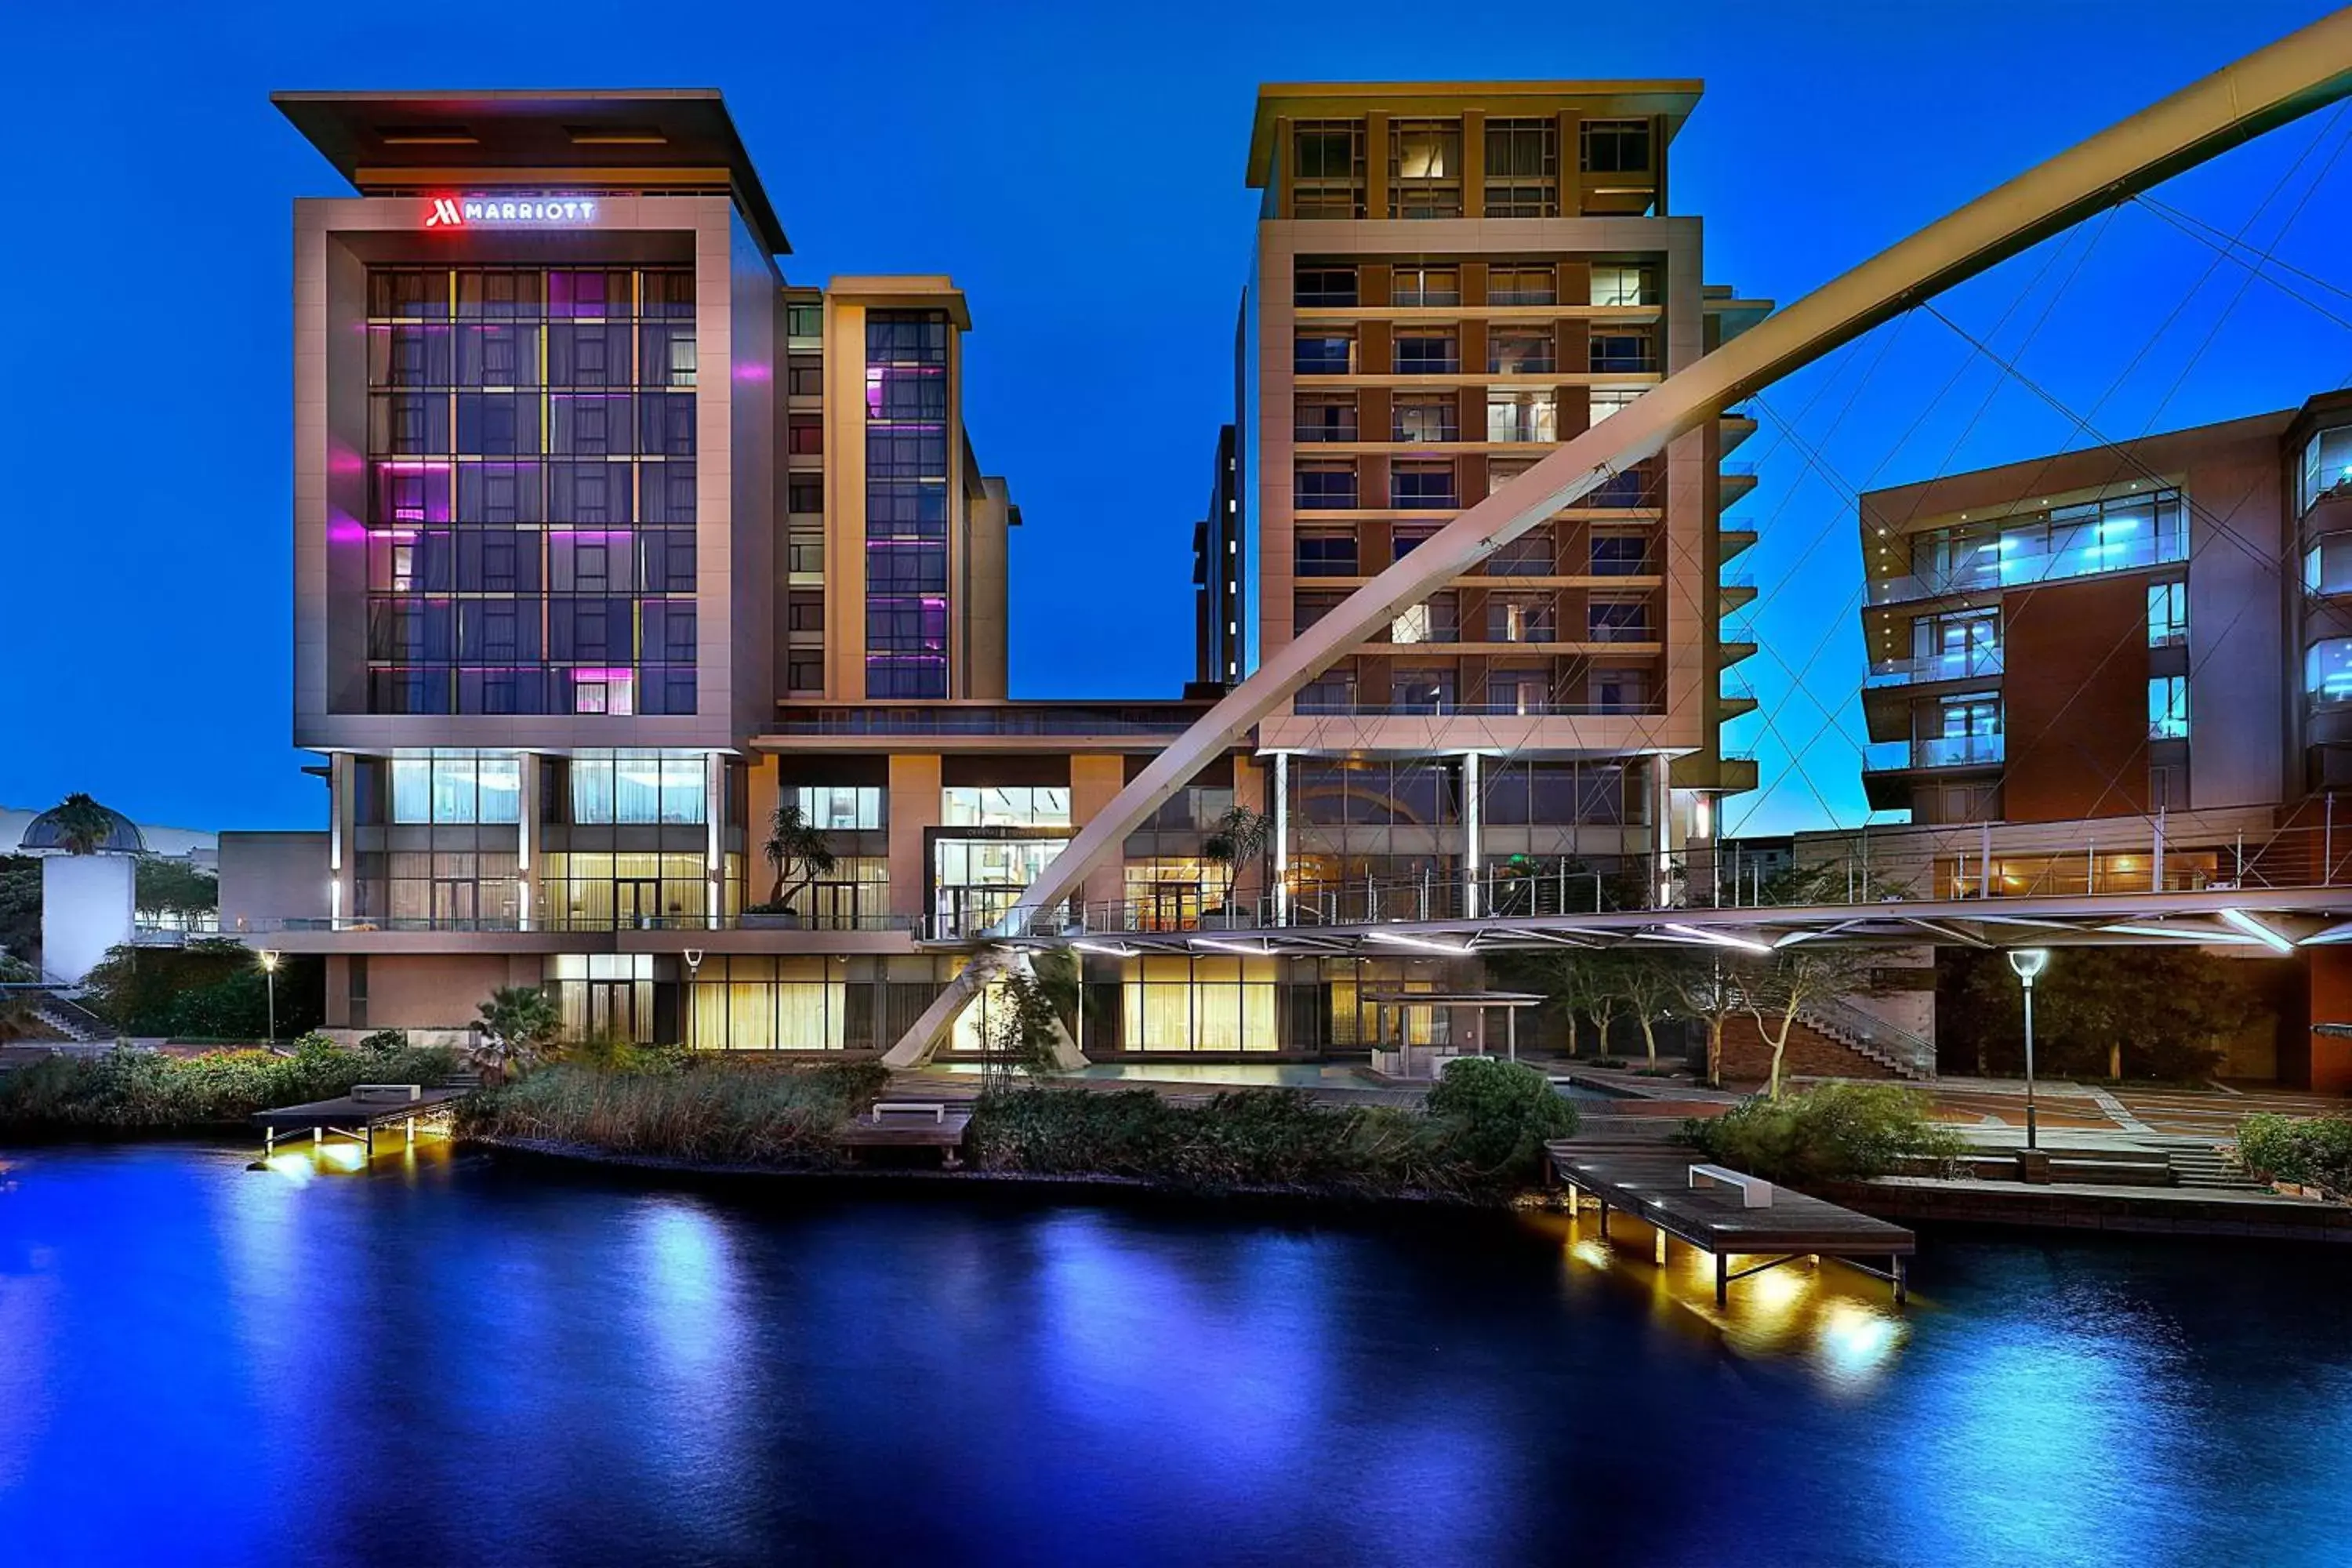 Property building, Swimming Pool in Cape Town Marriott Hotel Crystal Towers